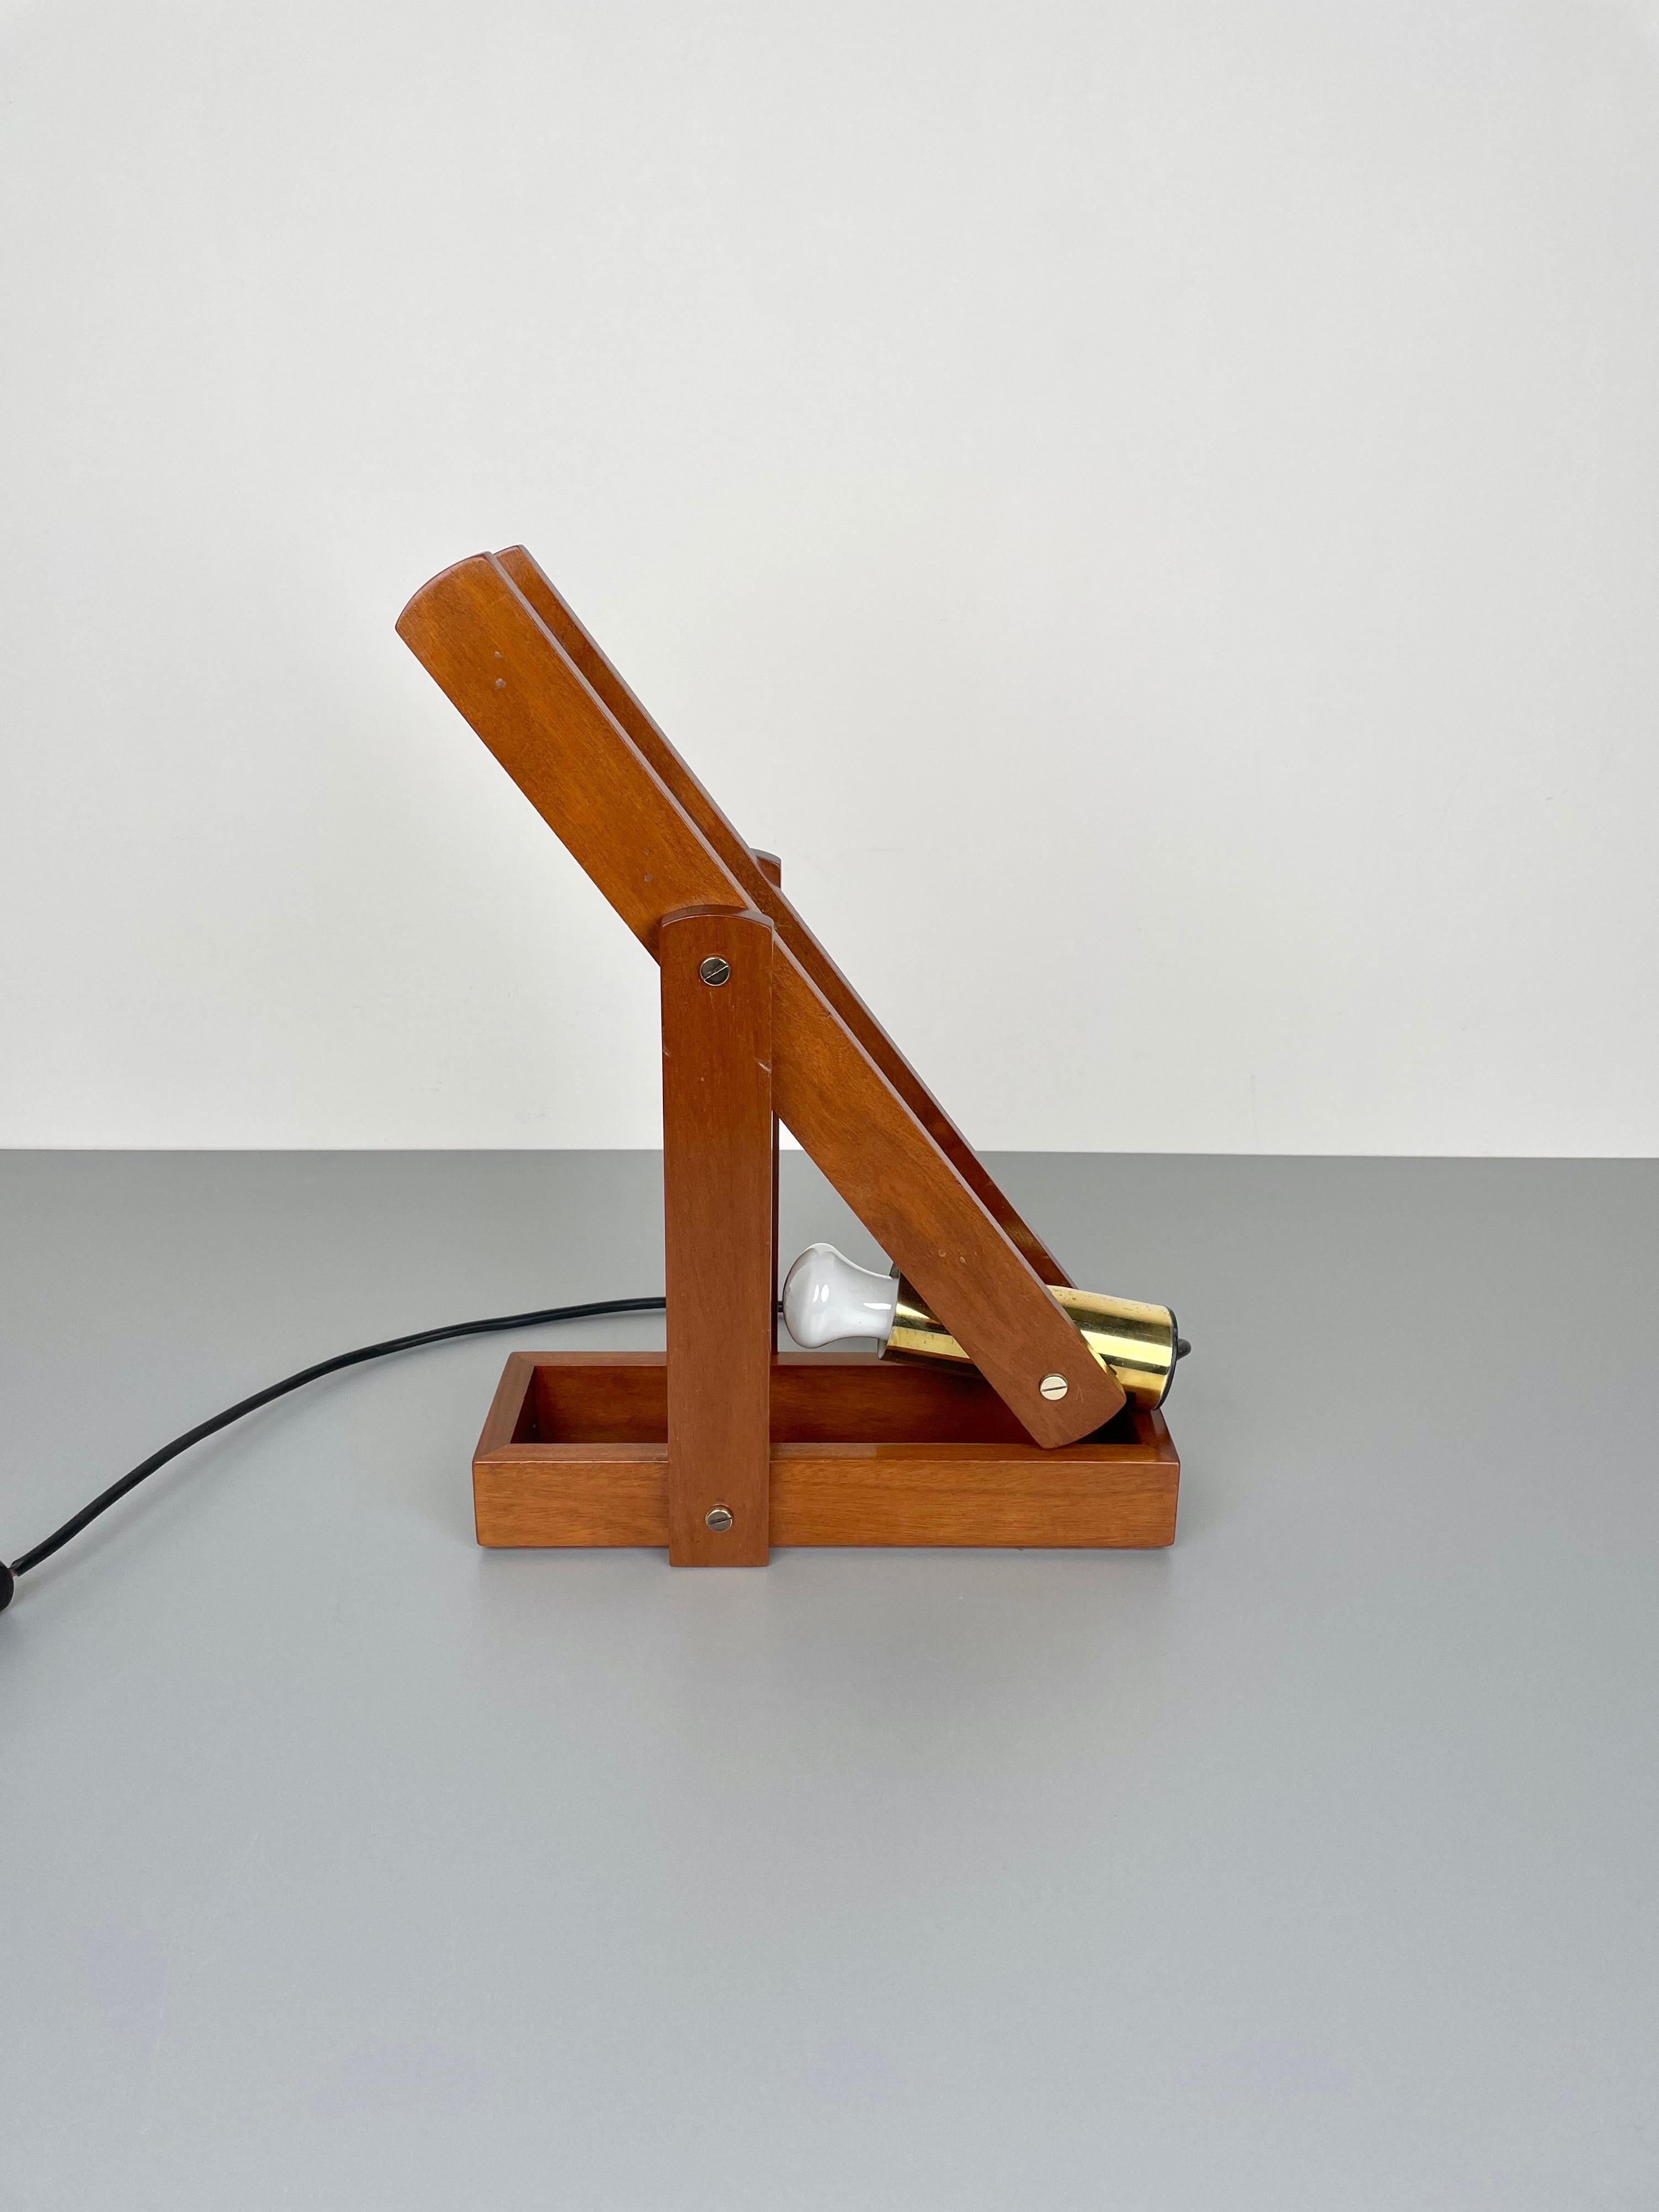 Adjustable Wood & Brass Table Lamp, Italy, 1960s For Sale 10